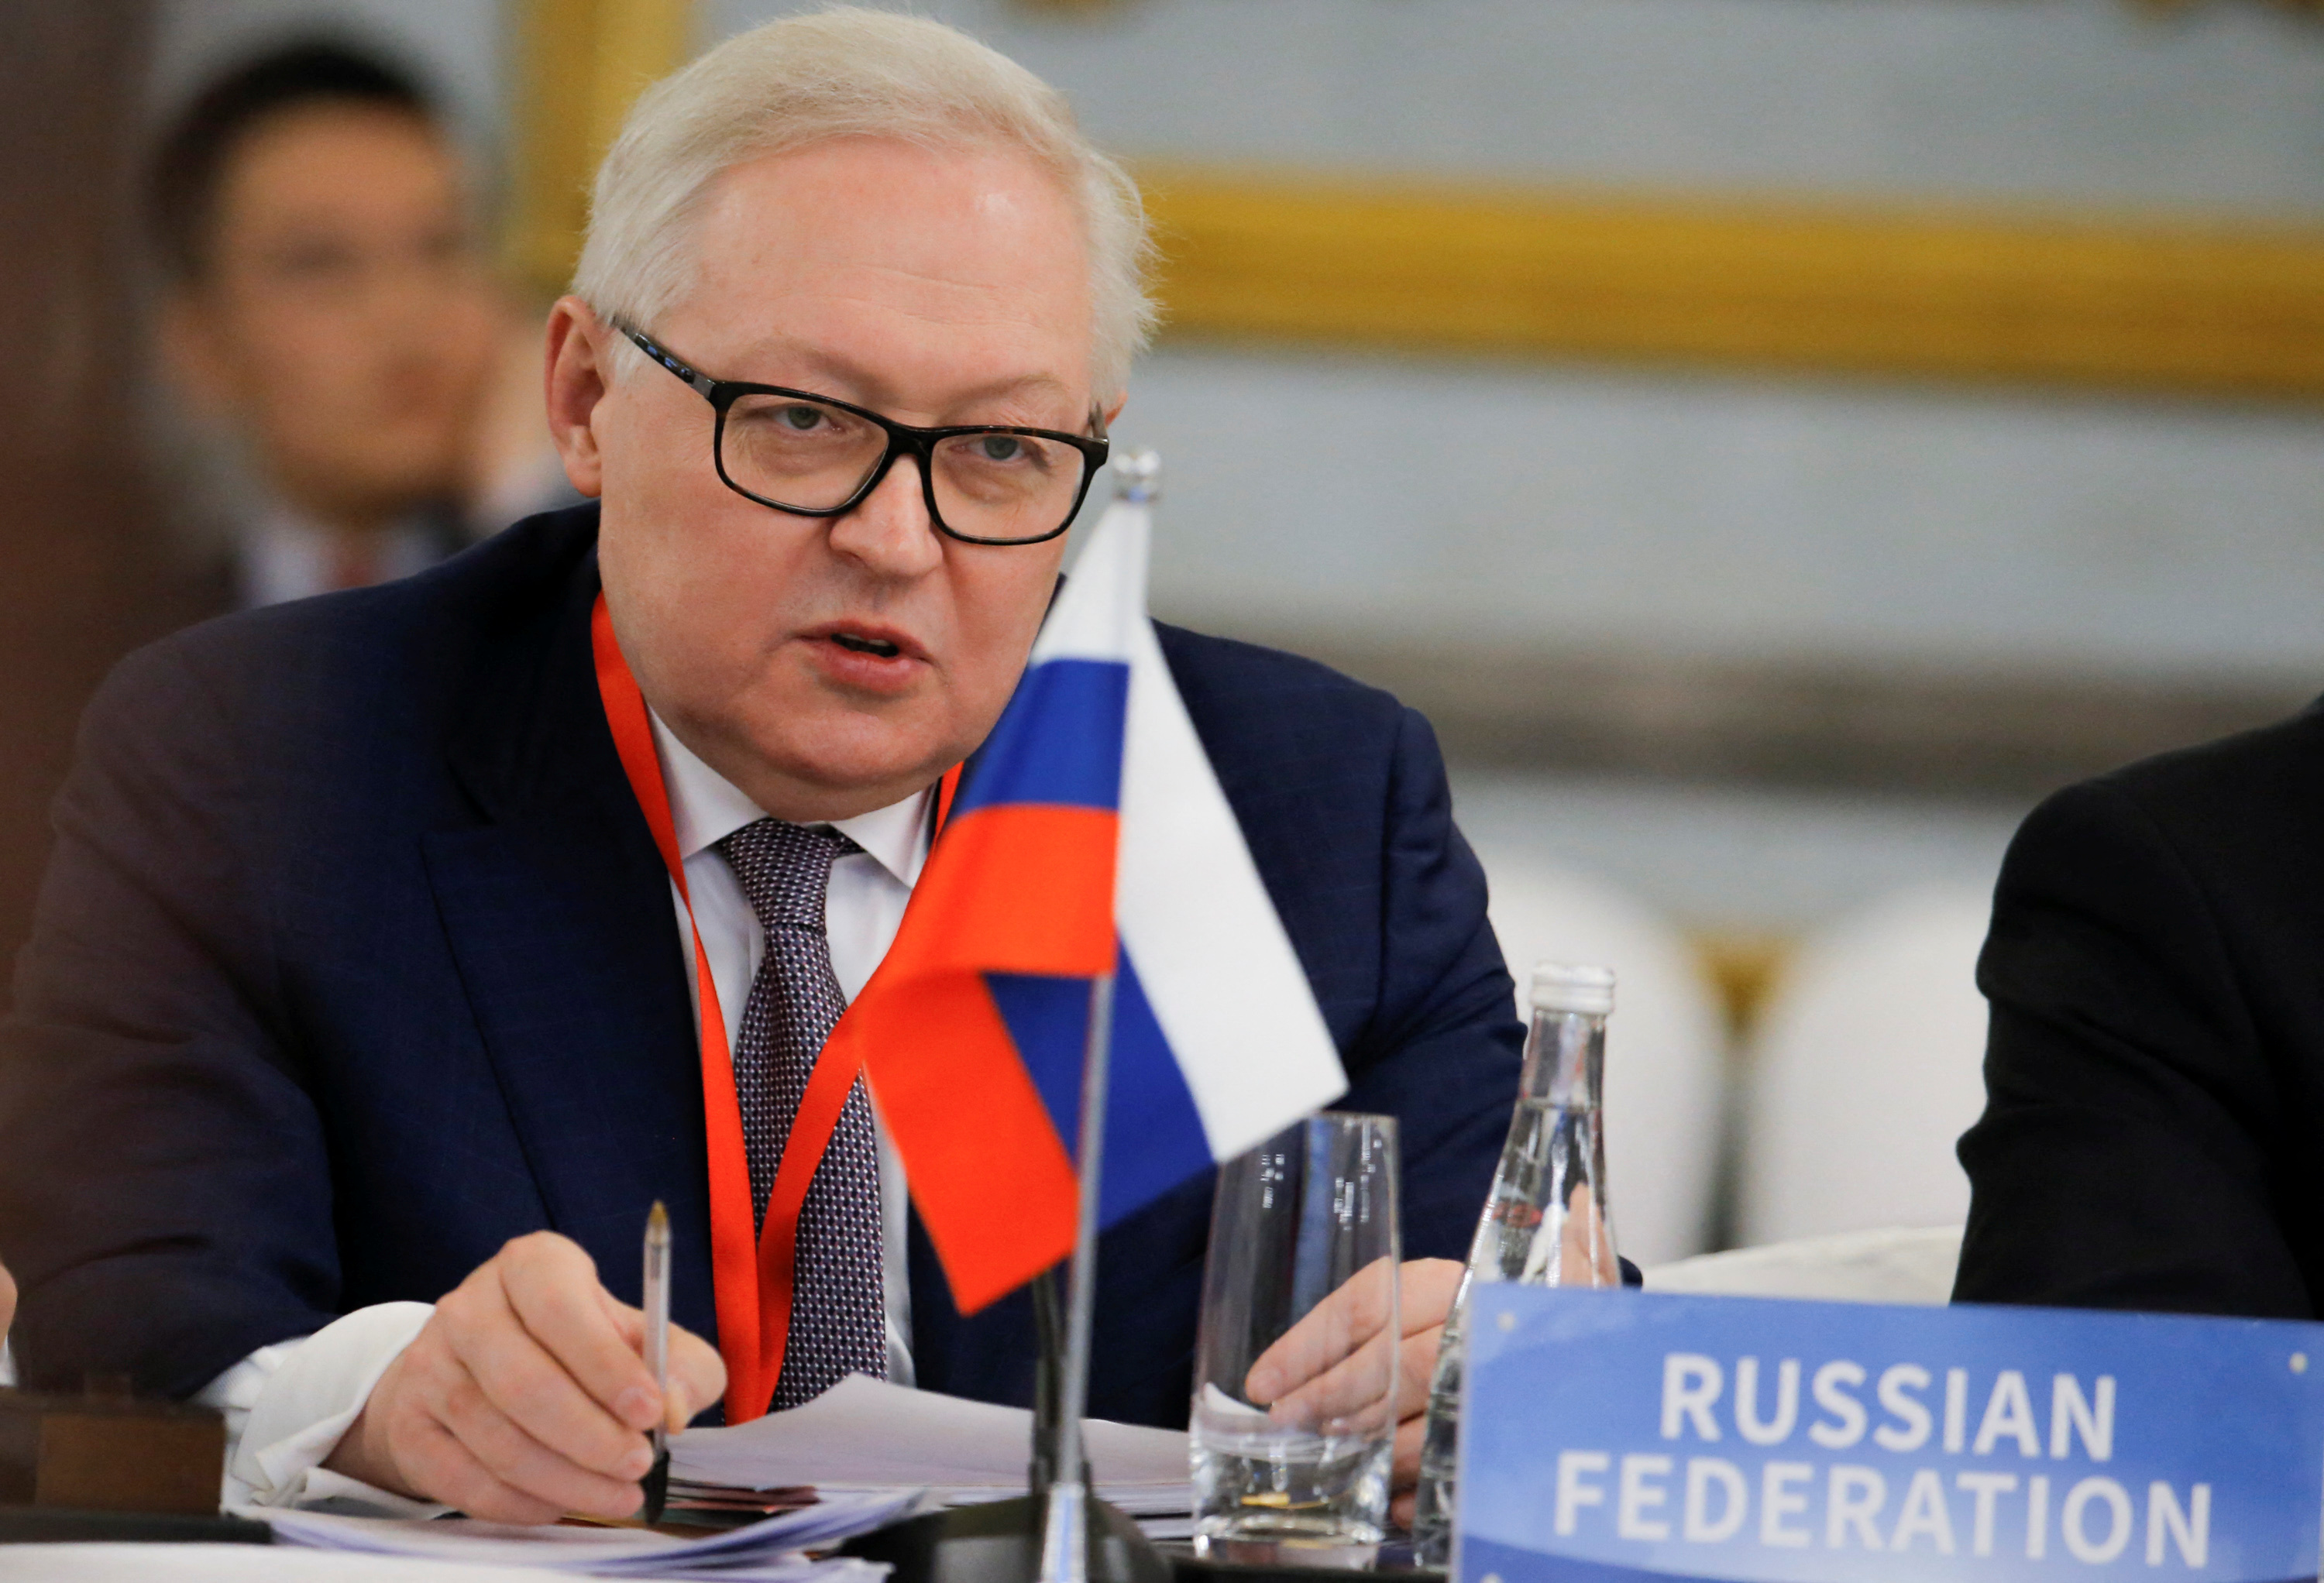 Russian Deputy Foreign Minister and head of delegation Sergey Ryabkov attend a P5 NPT conference in Beijing